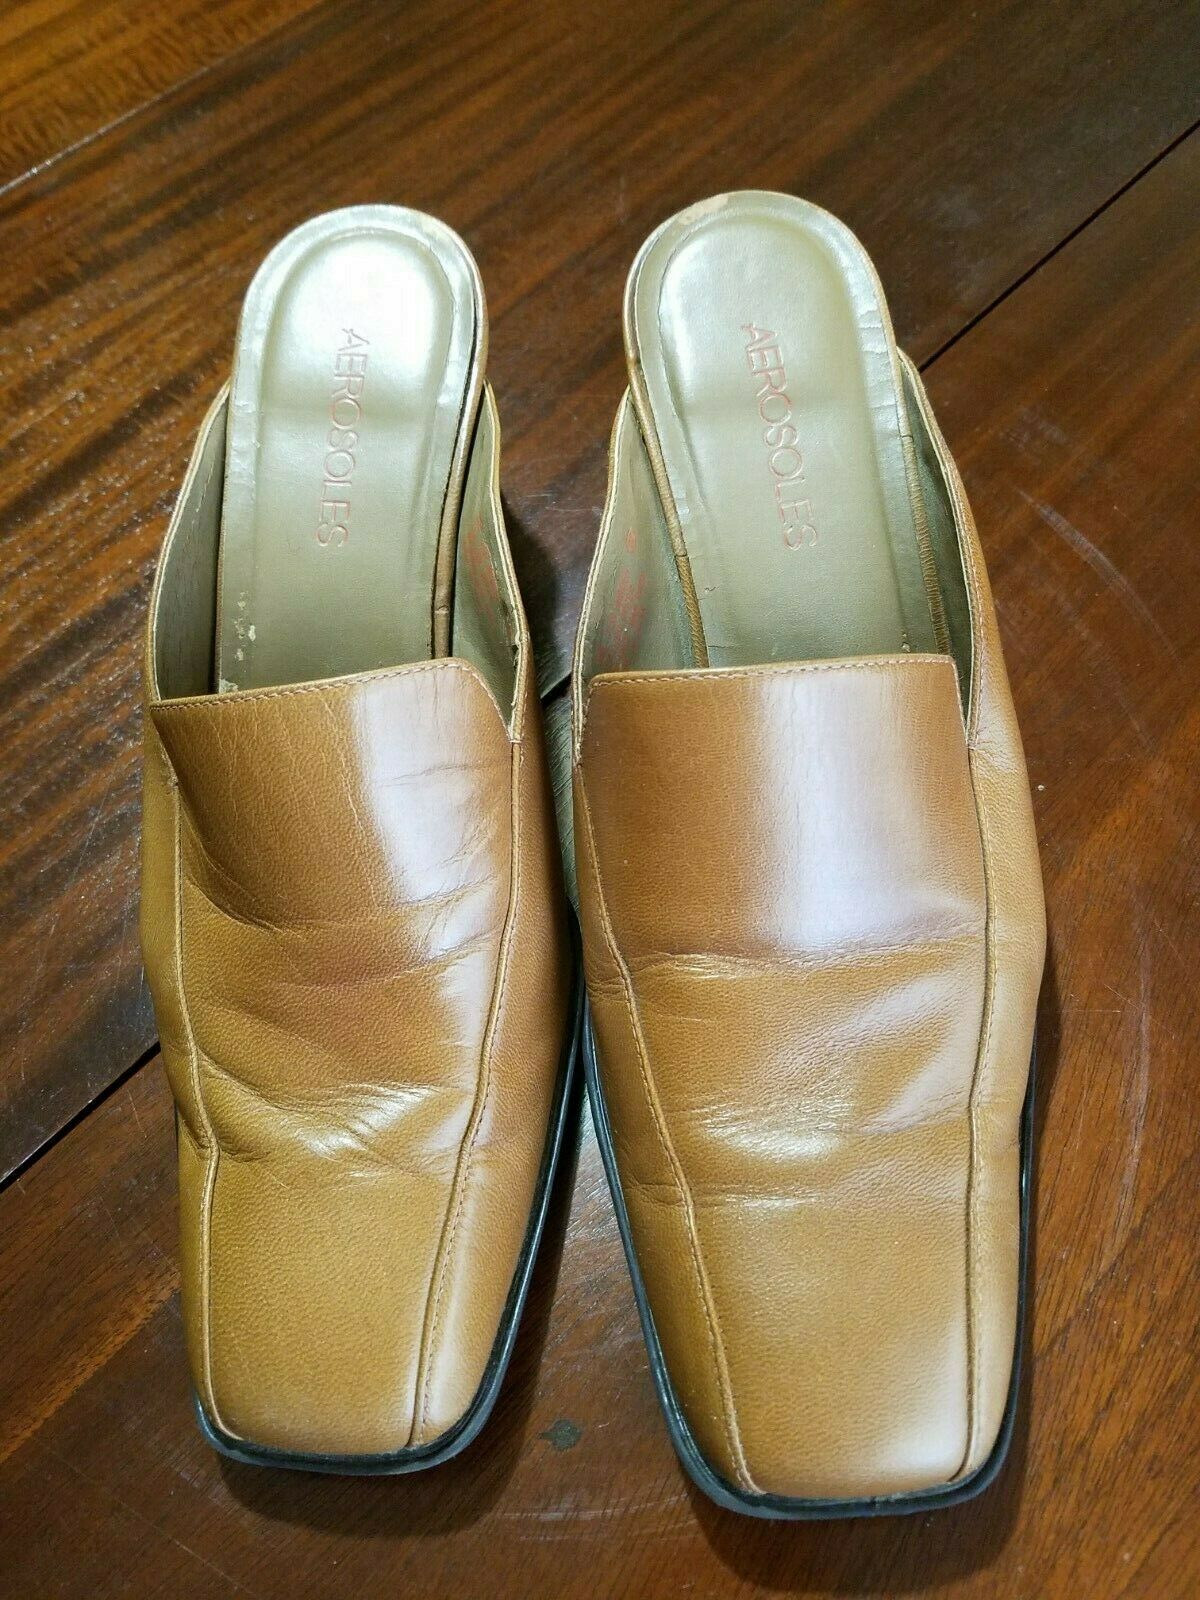 Women's Aerosoles Shoes Size 8B For Midden Mule in Peanut Color Leather